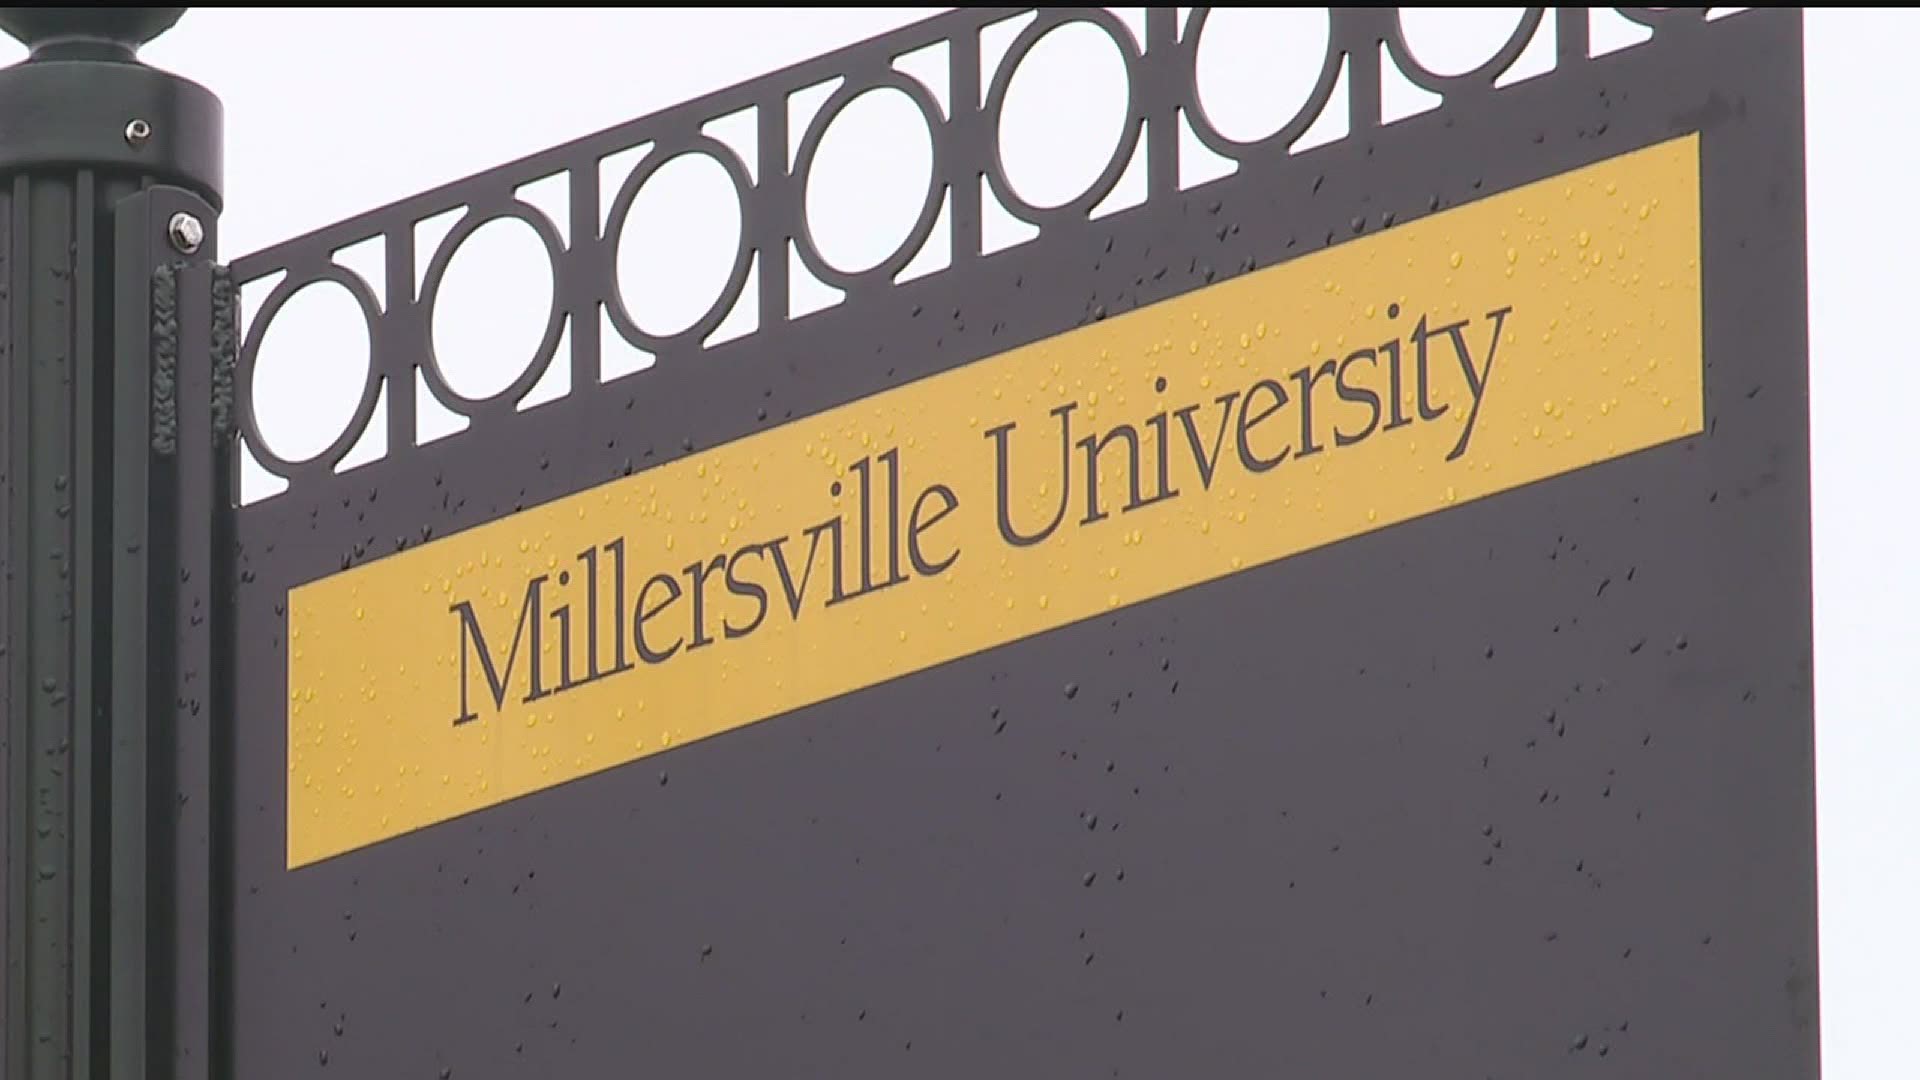 MU is suspending all in-person classes through March 27. The school says it will re-assess its decisions on a weekly basis.